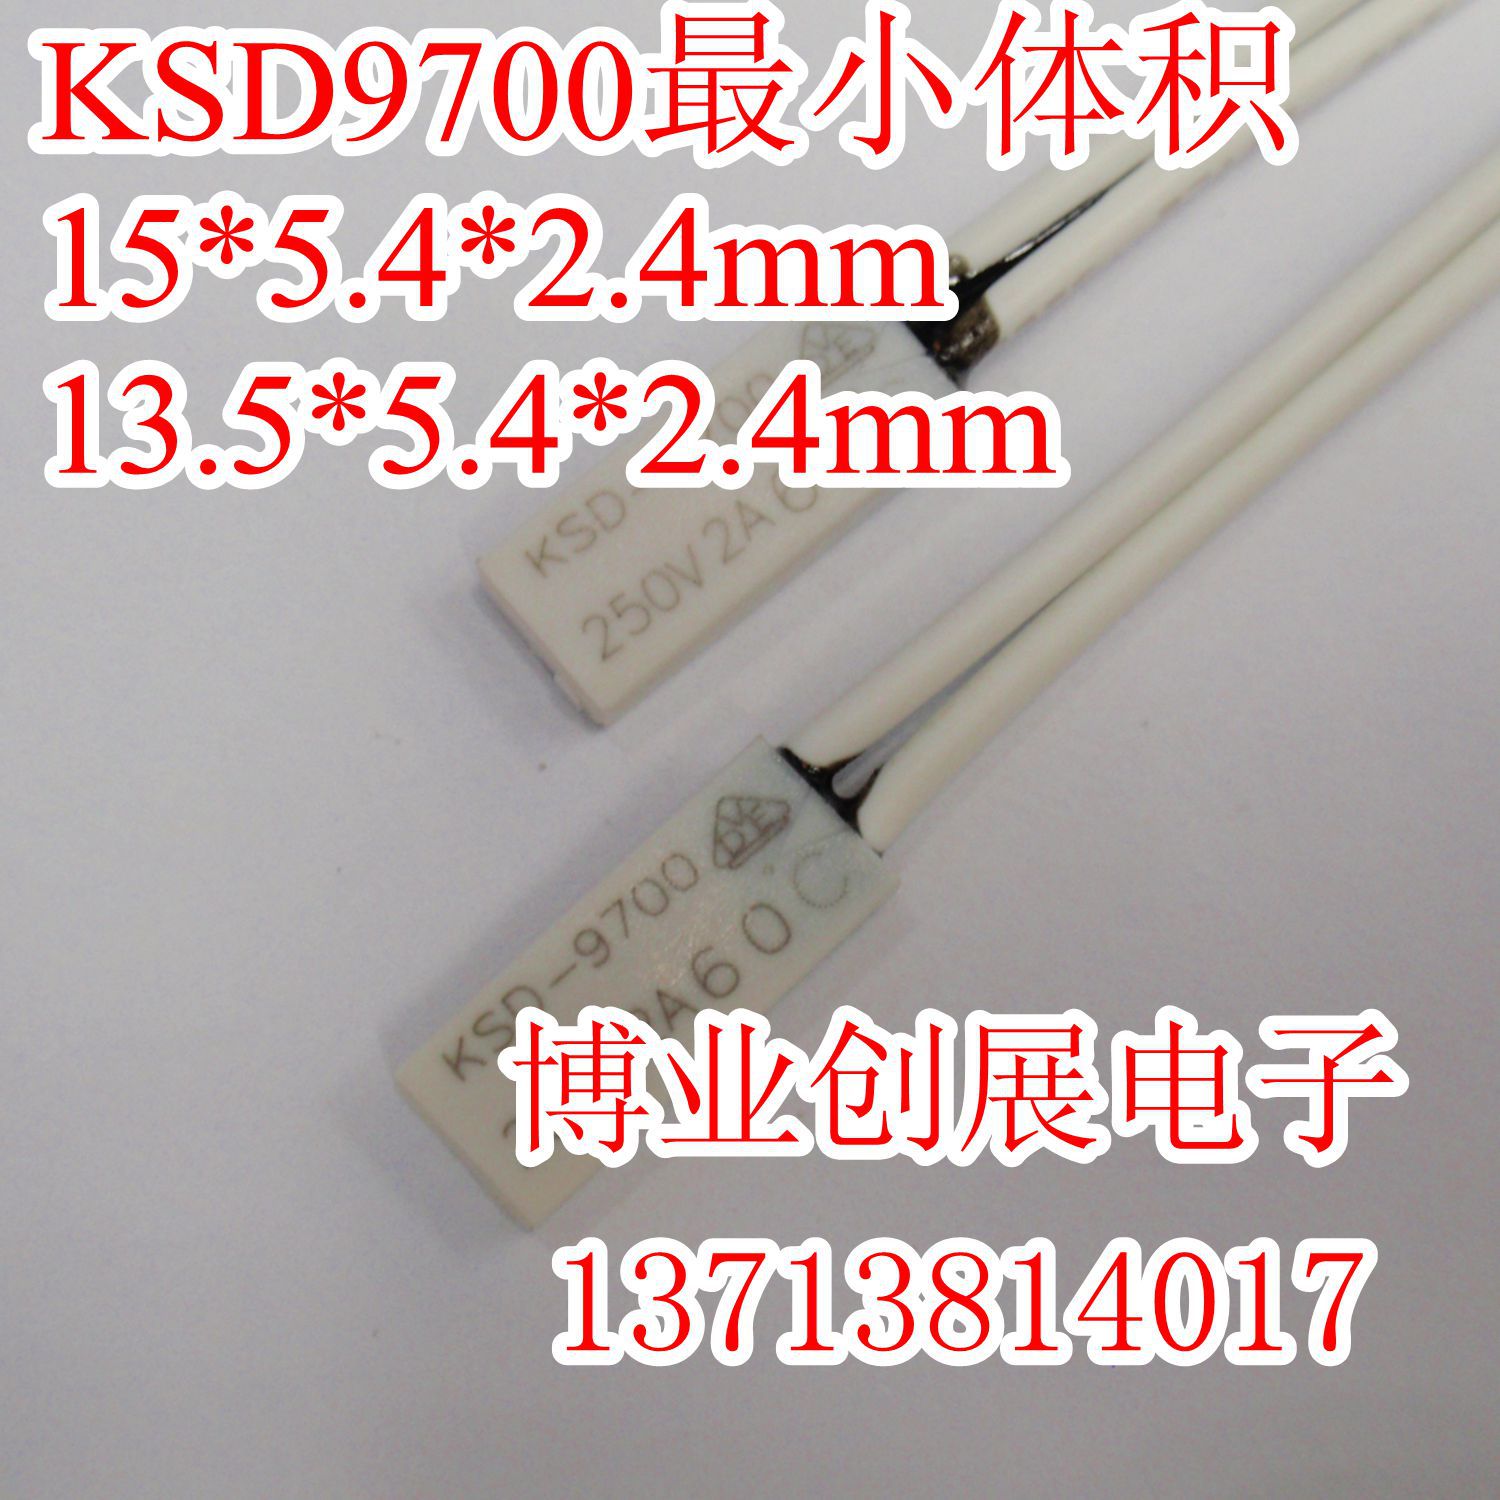 Supply temperature controller KSD9700 Temperature control switch Normally closed Thermostat switch 40-185 degrees